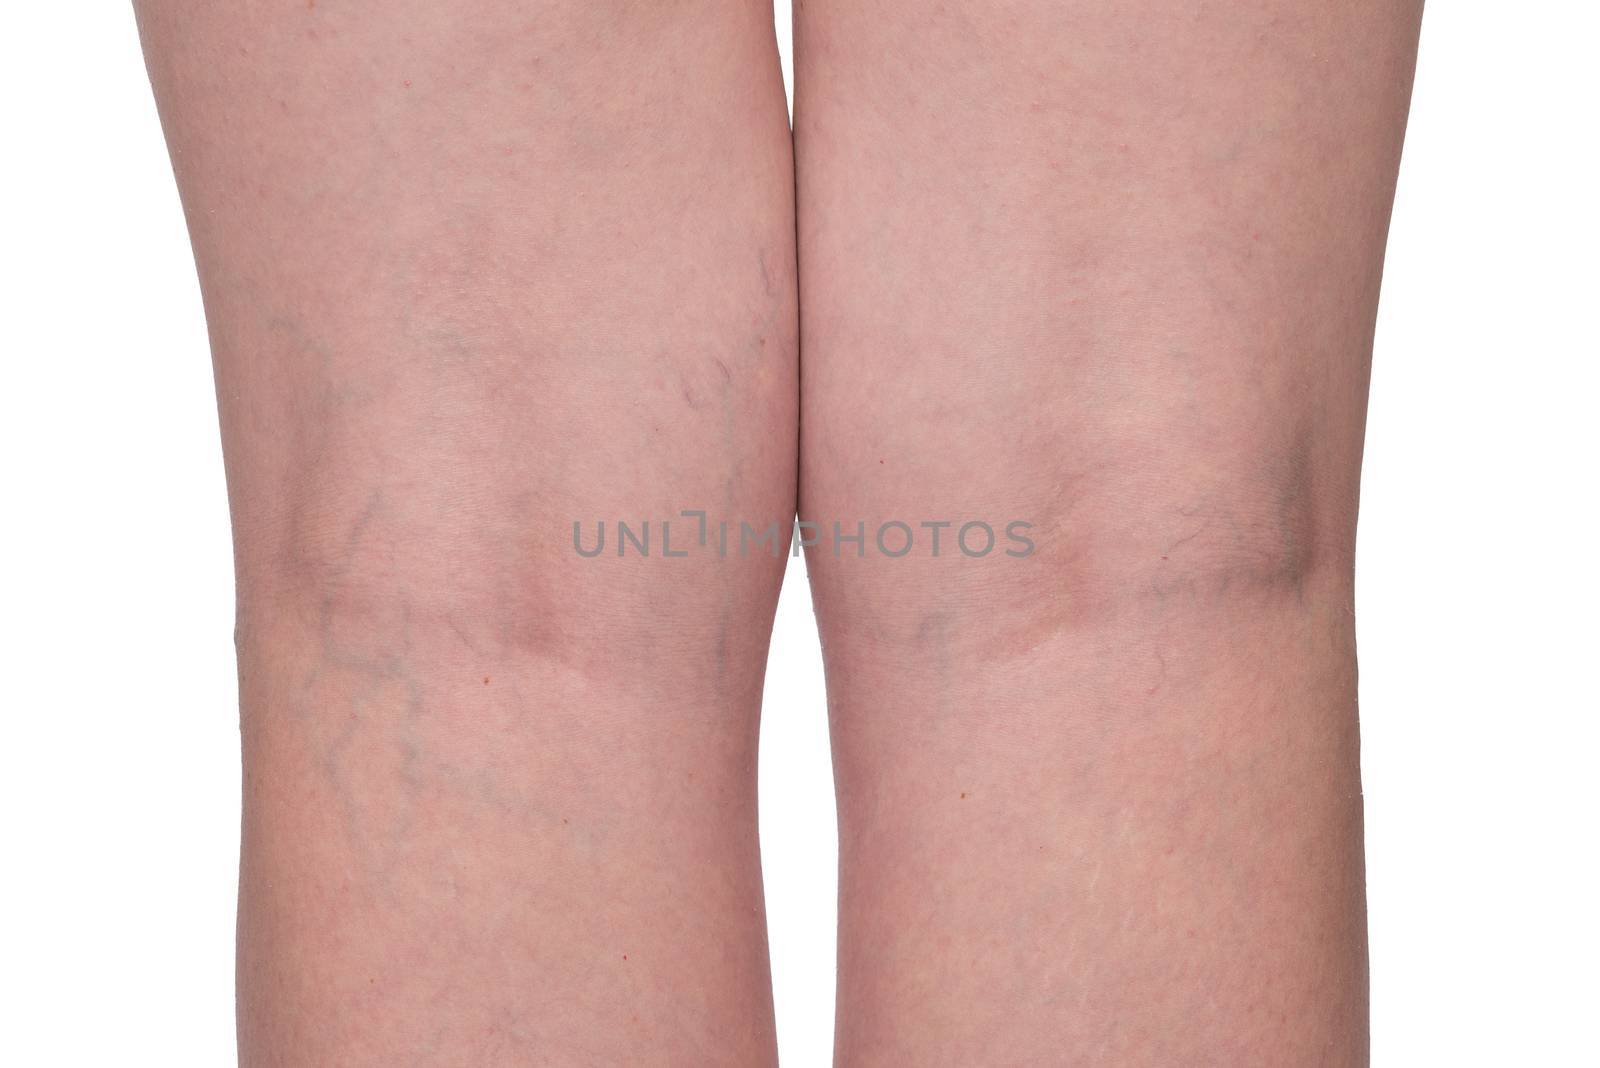 Medical problem - varicose veins, female legs close up on a white background